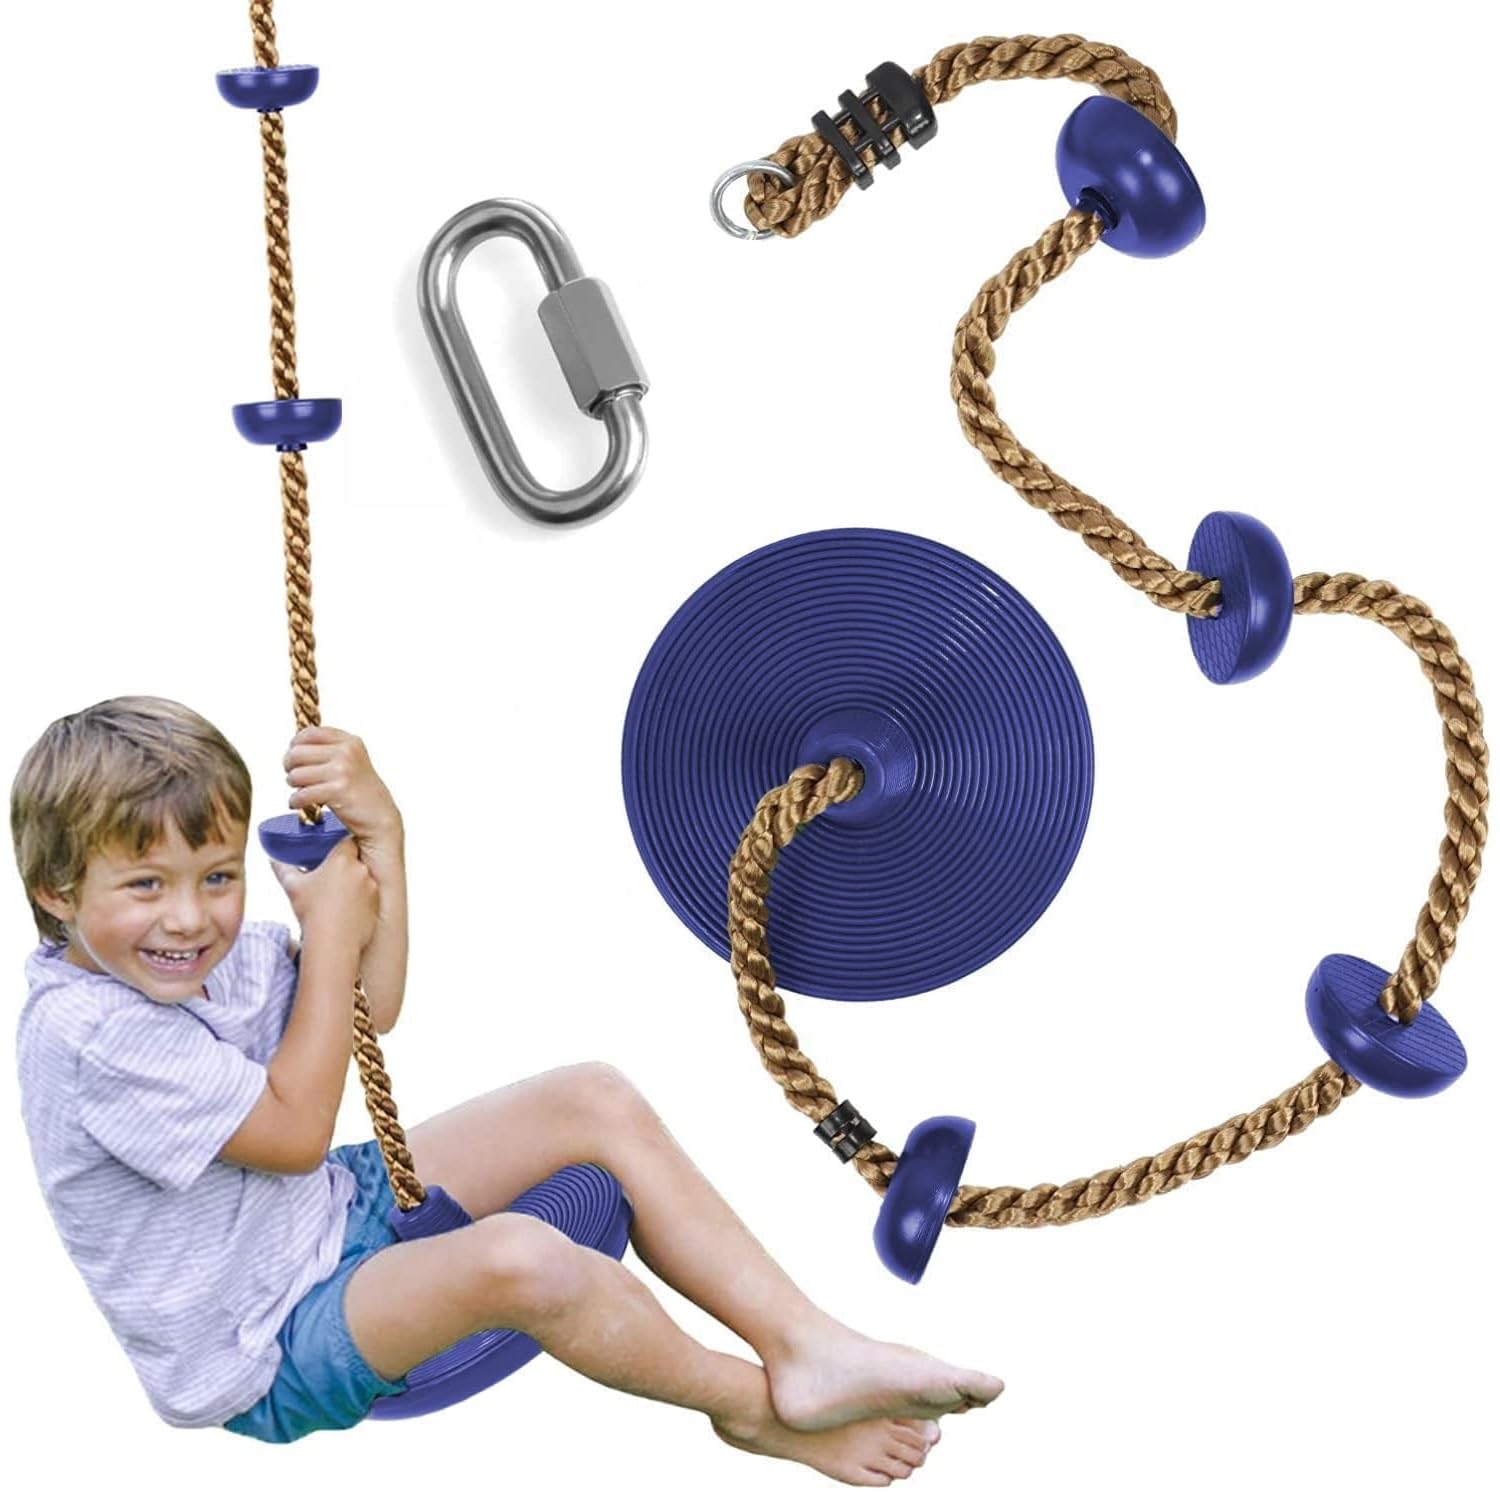 Swing Seat and Climbing Knot Rope